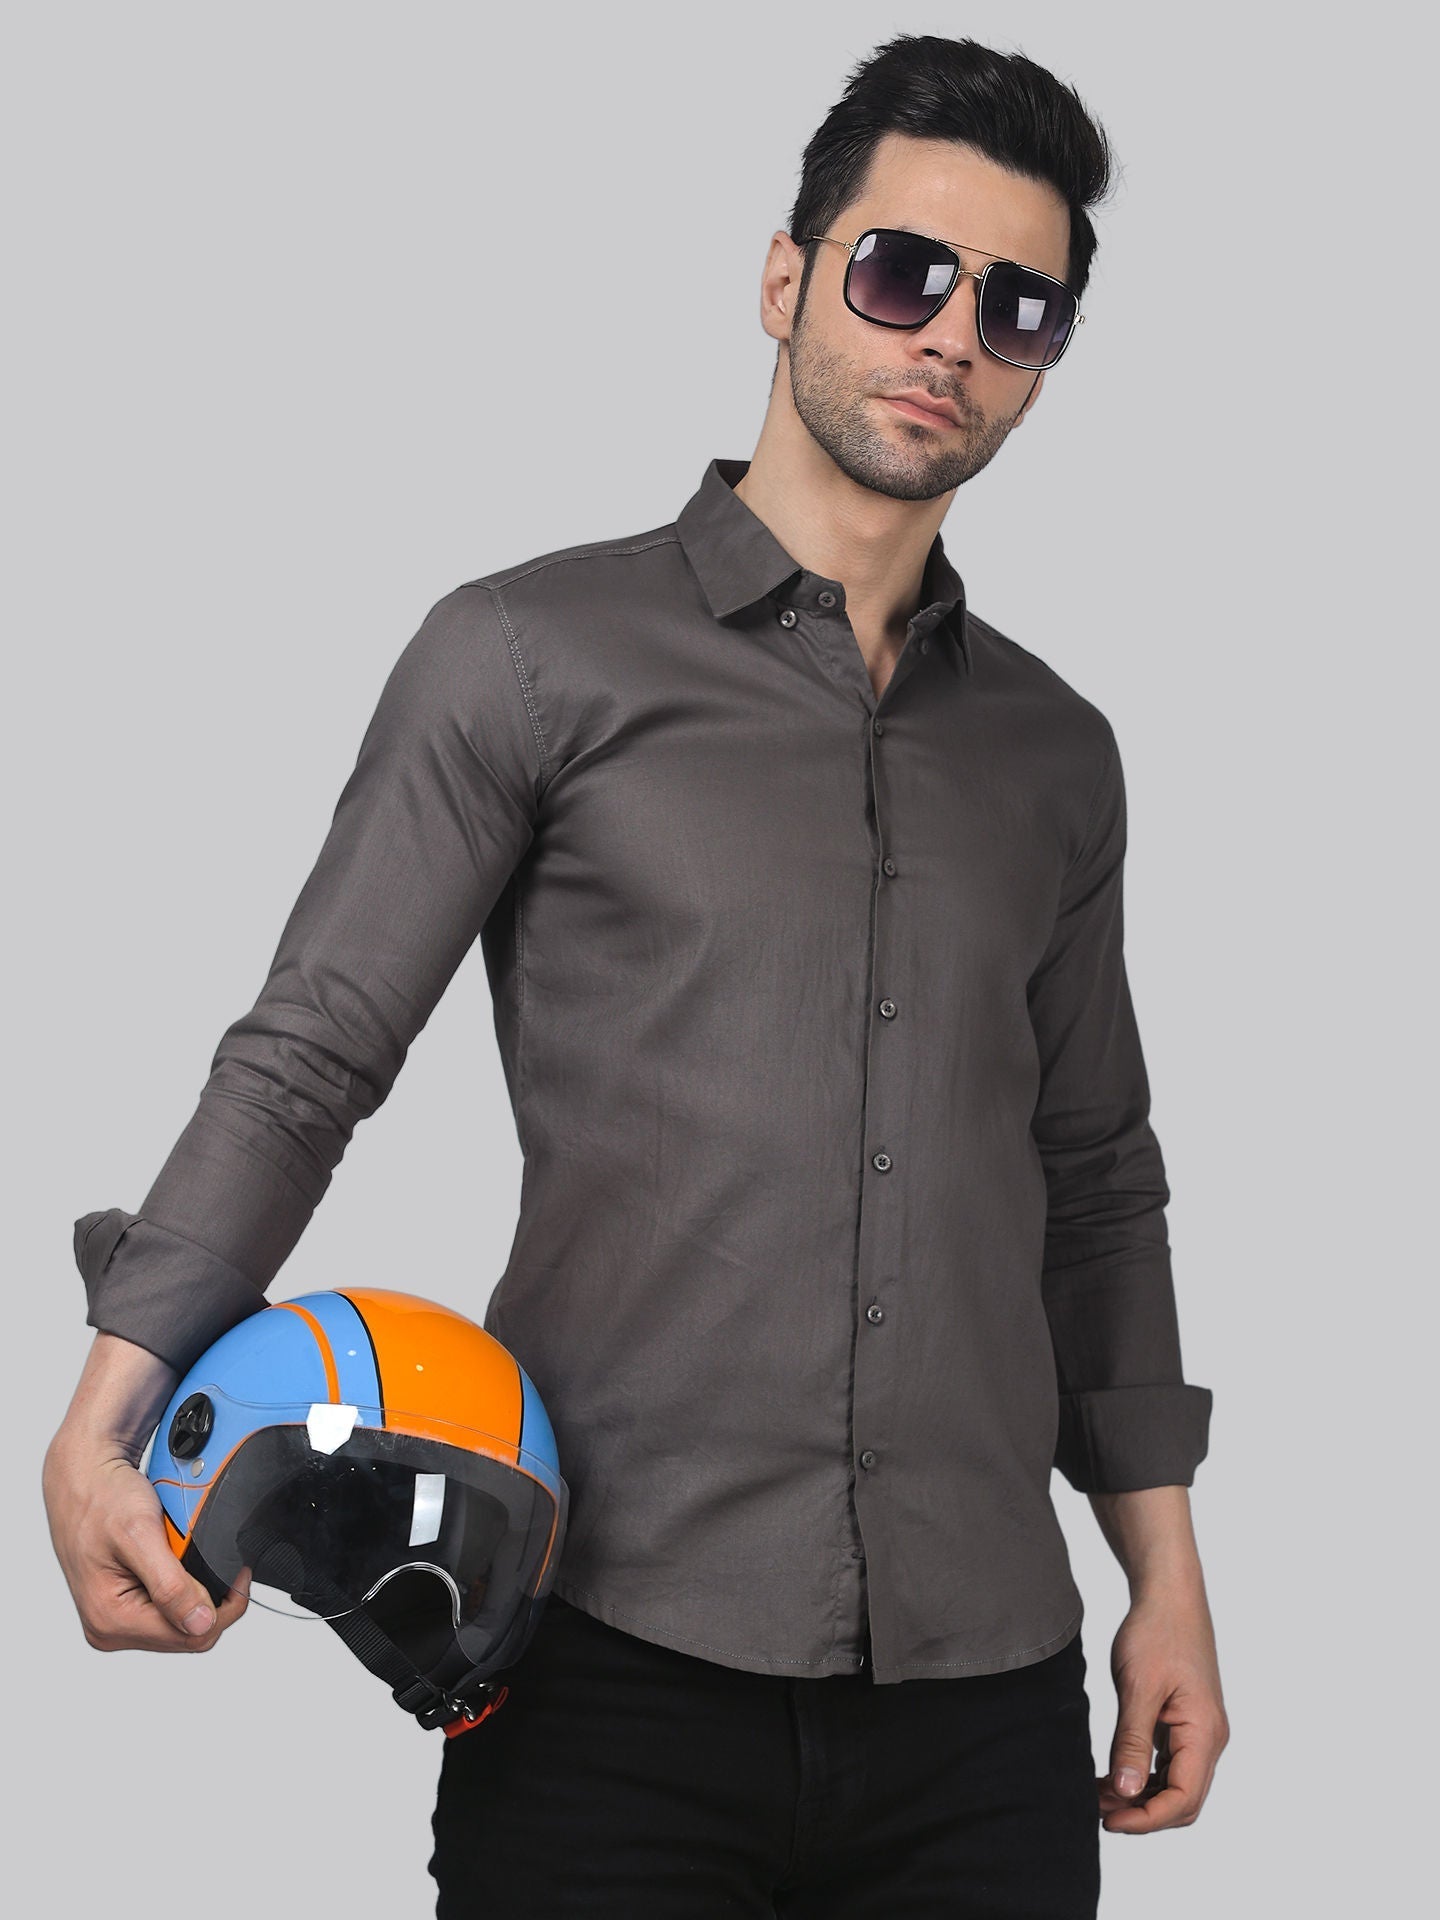 Sporty-luxe TryBuy Premium Grey Cotton Casual Shirt for Men - TryBuy® USA🇺🇸